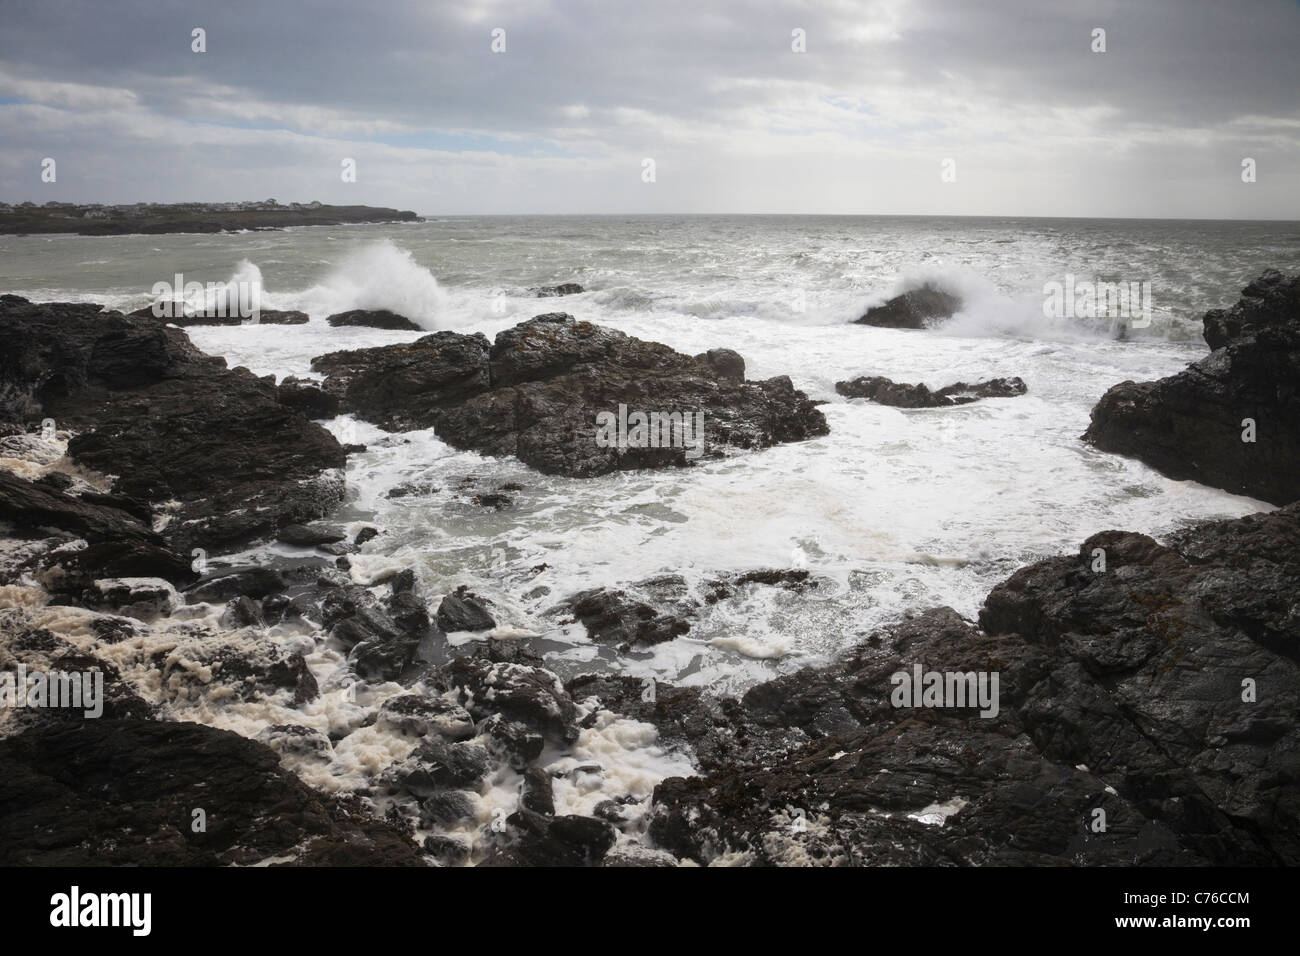 Trearddur Bay, Anglesey, North Wales, UK. Rough sea with waves crashing on rocks during gale force winds on the west coast. Stock Photo